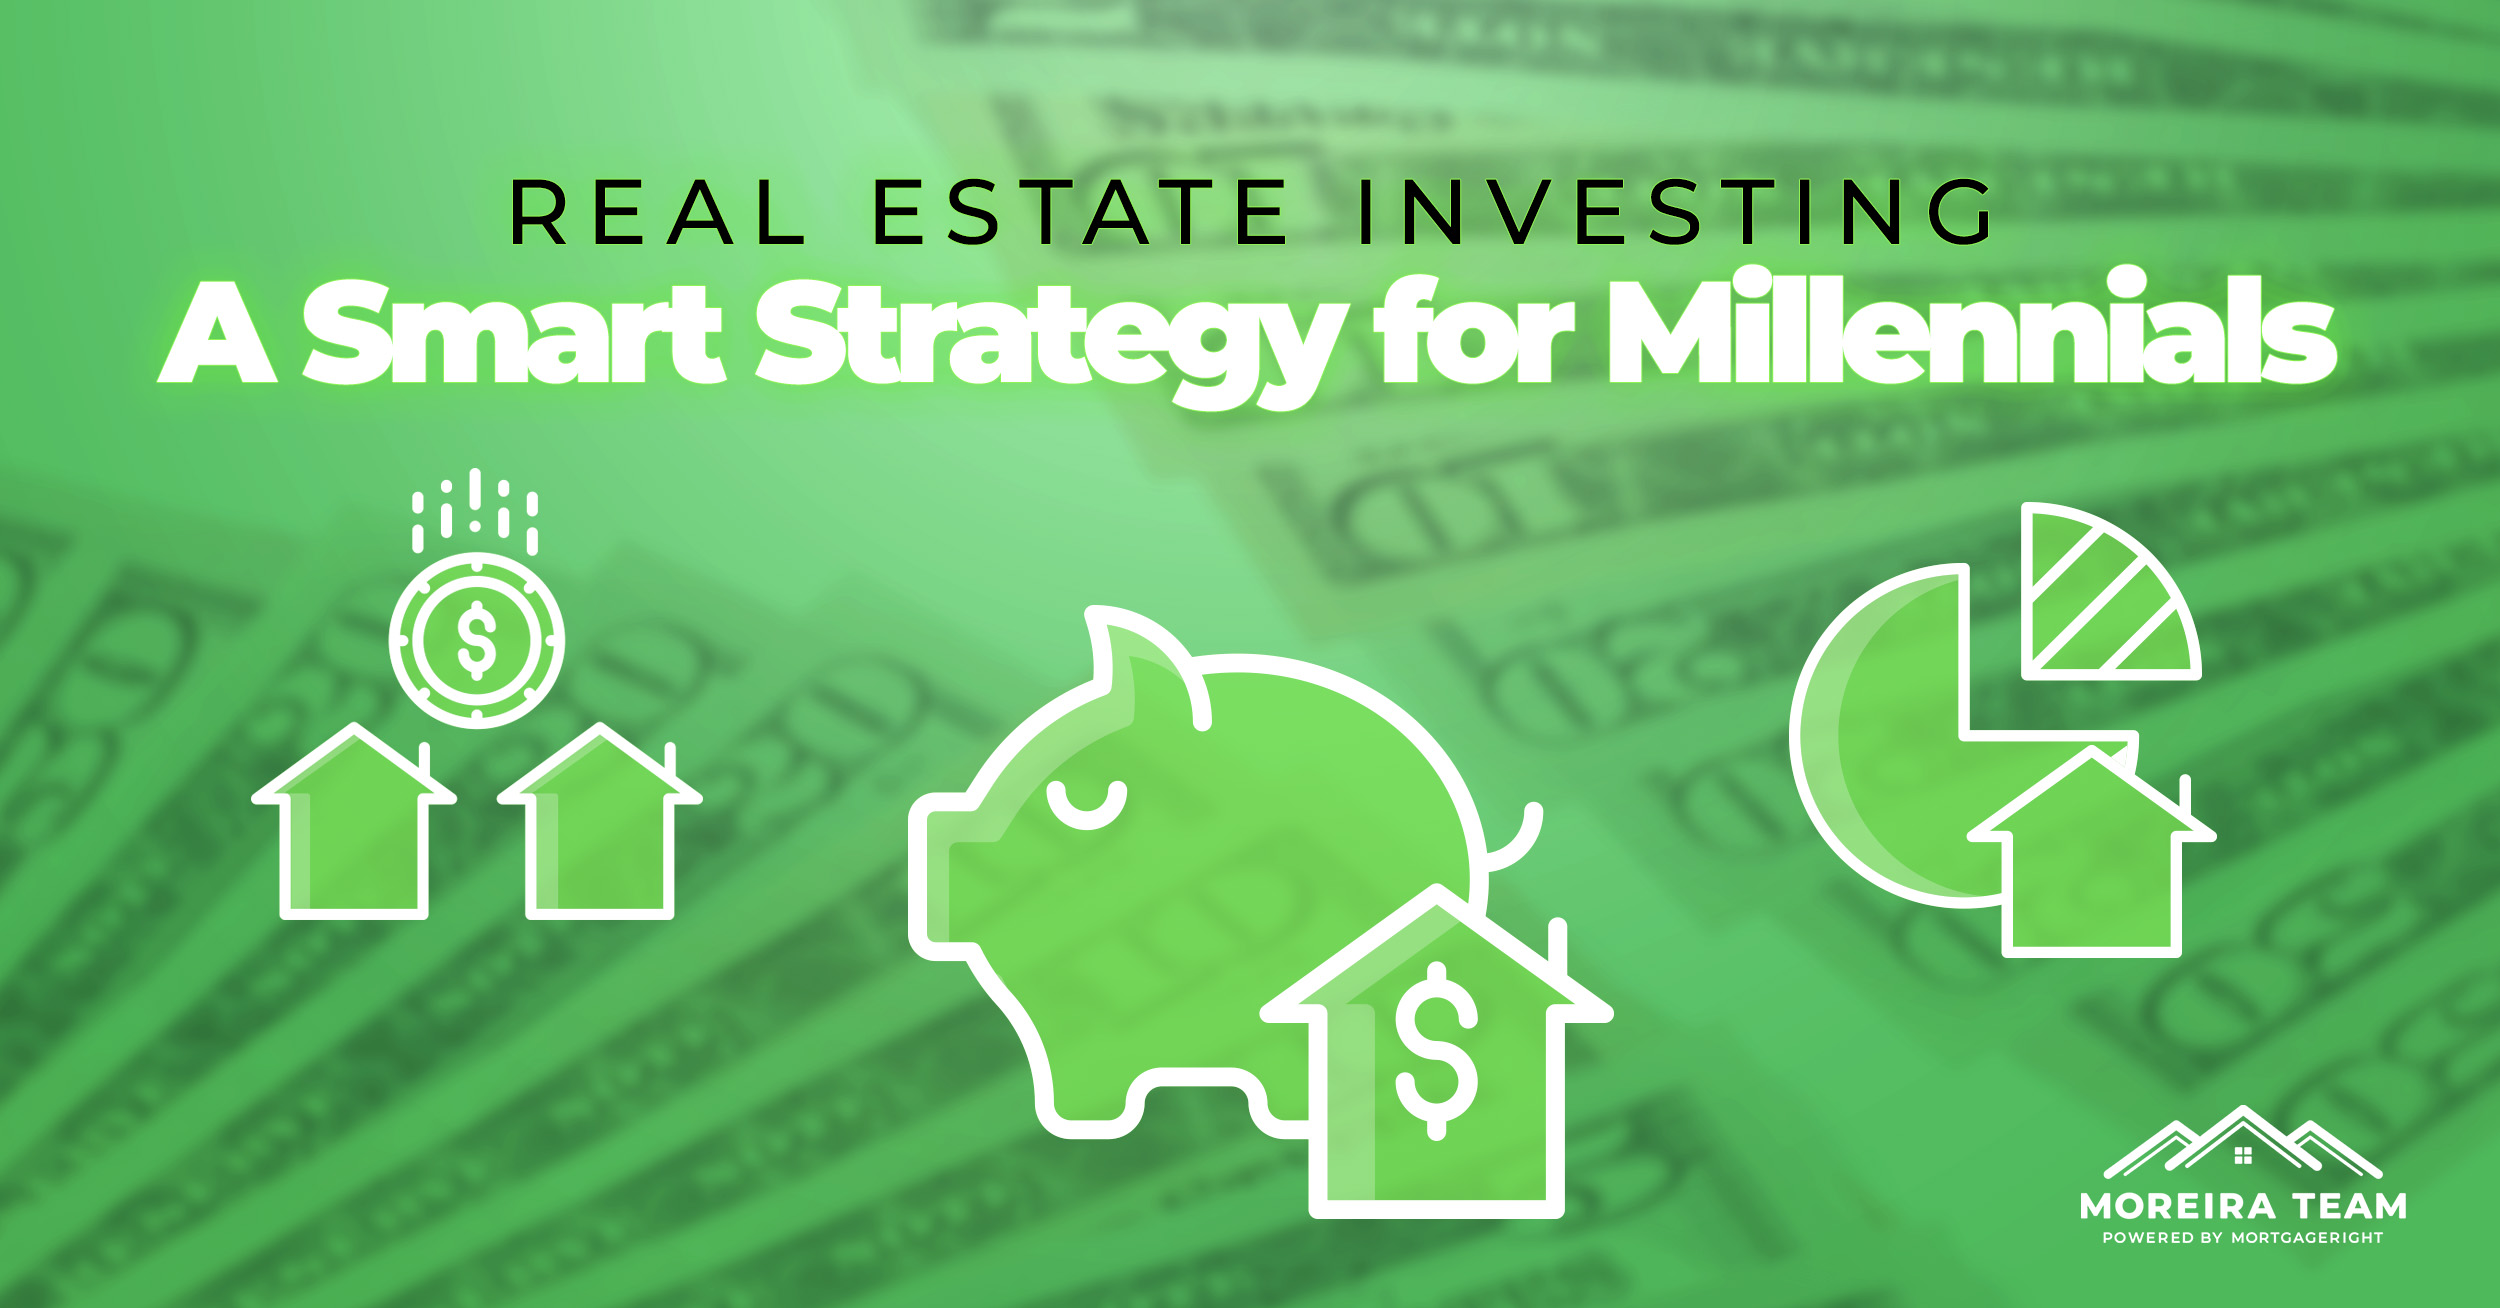 Real Estate Investing: A Smart Strategy for Millennials